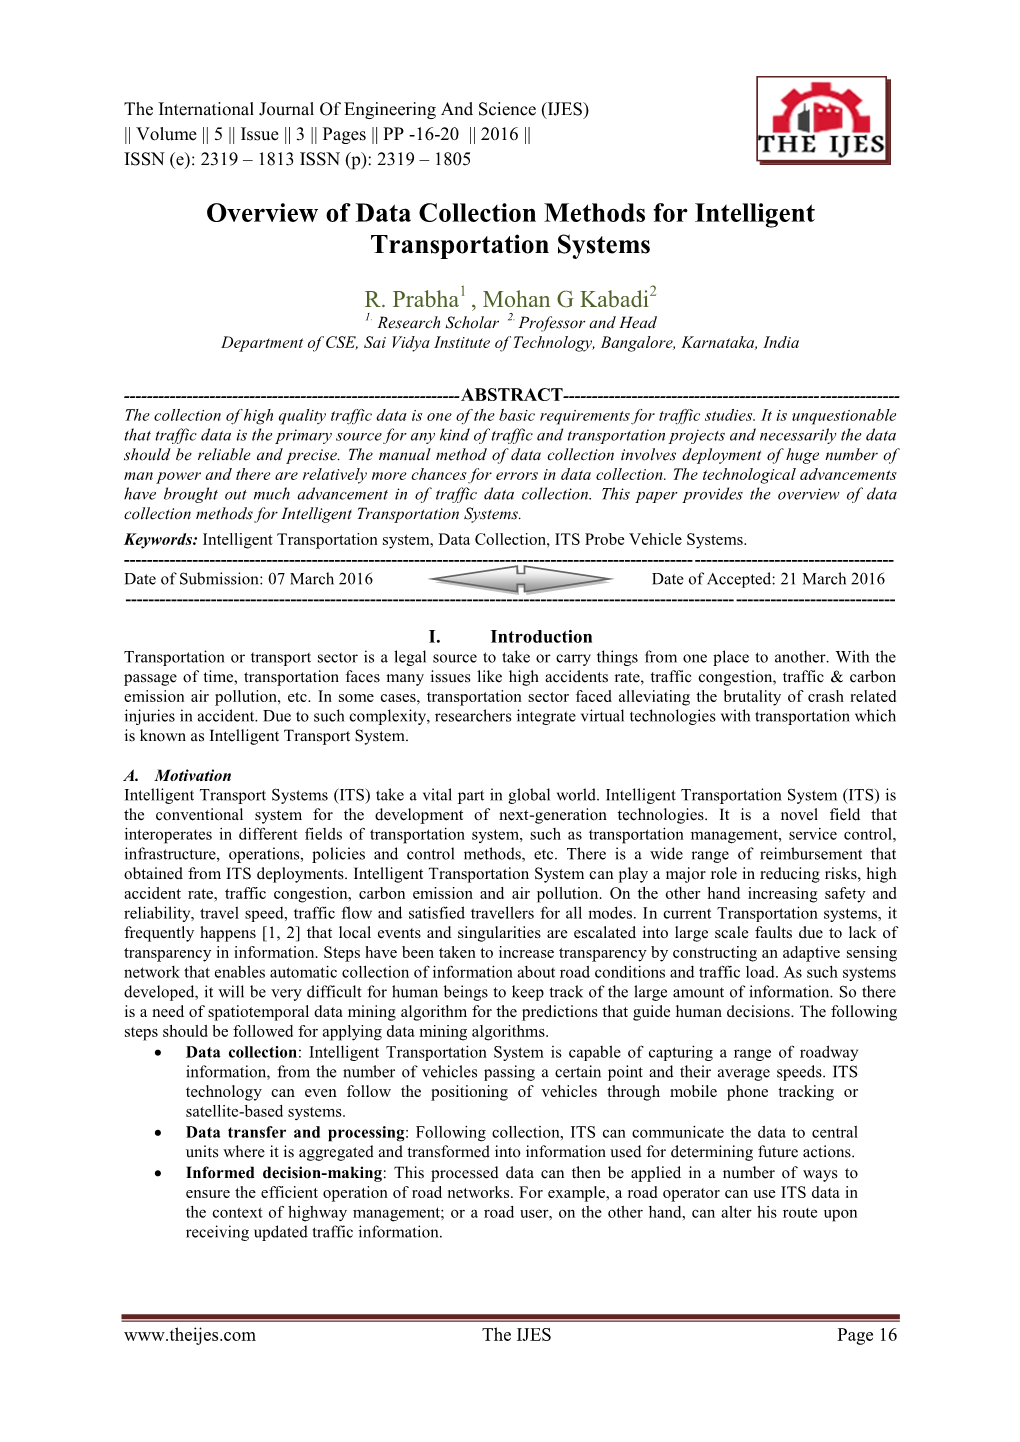 Overview of Data Collection Methods for Intelligent Transportation Systems